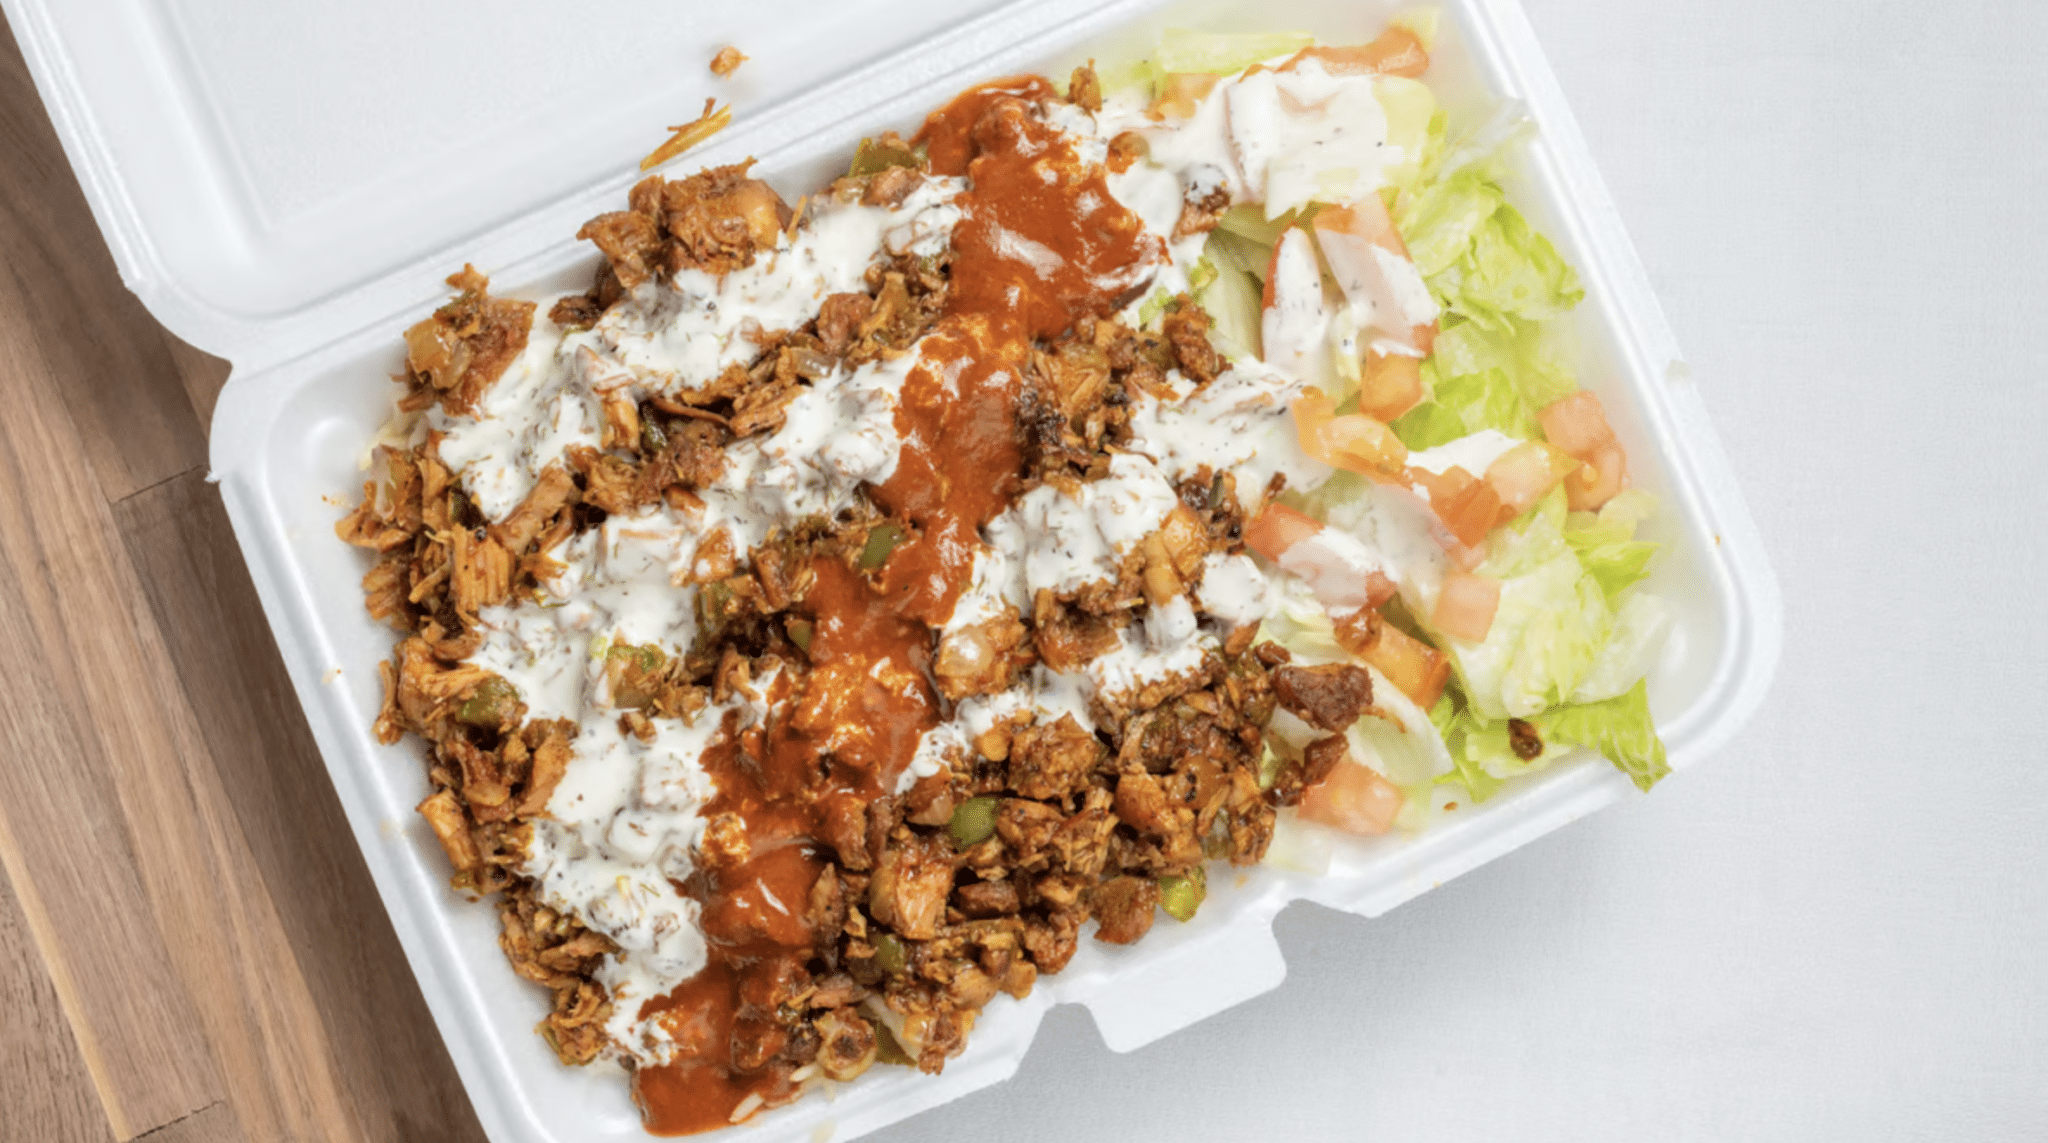 a photo of food from the halal cart